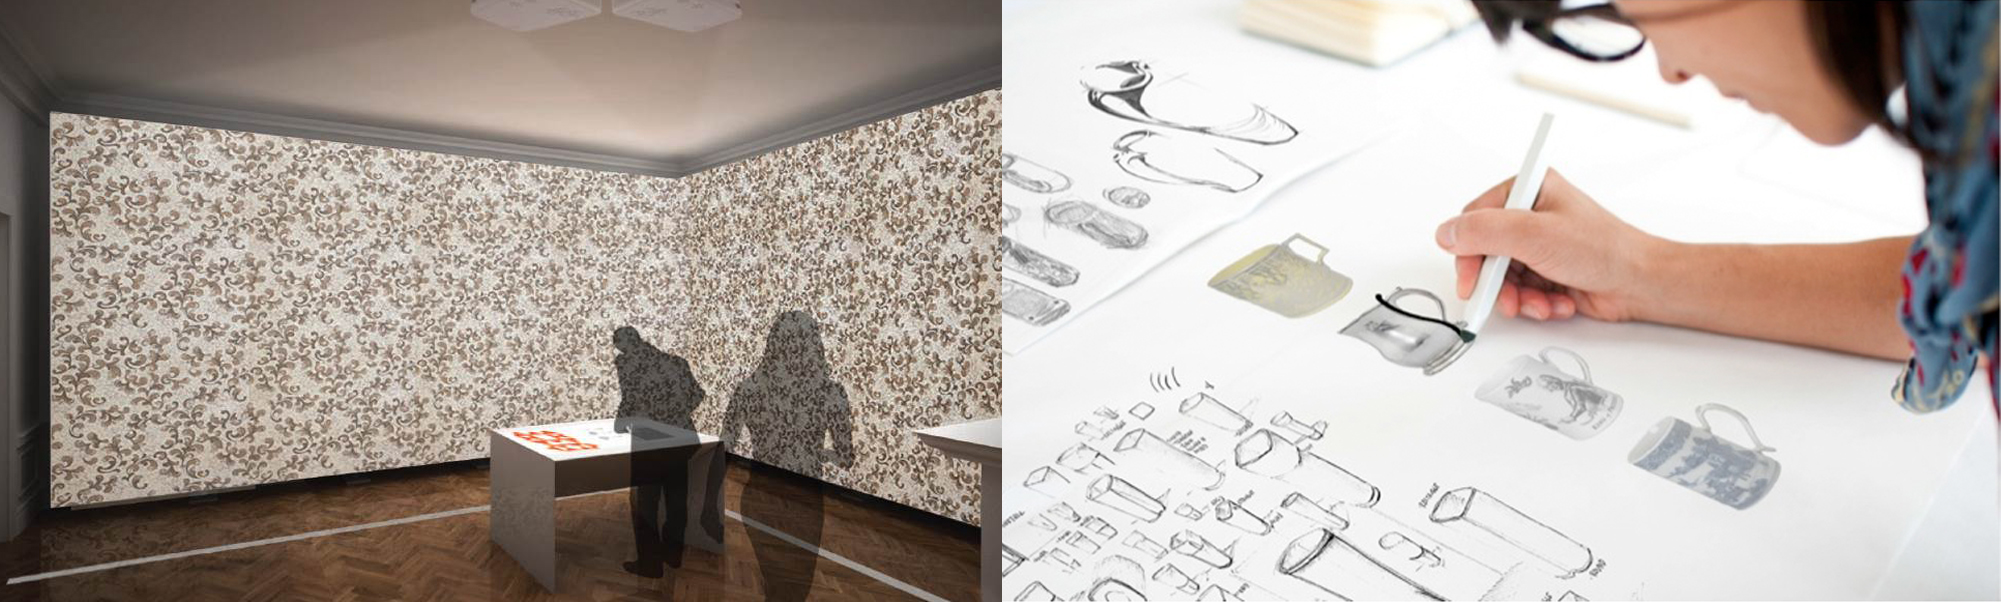 Image of two silhouettes in an architectural rendering of a room with pattern all over the walls and one of the people is hunched over a table, as if to draw. on the right, a different image of a woman sketching on a digital table, drawing a thick black line over the contour of a drawn teacup.